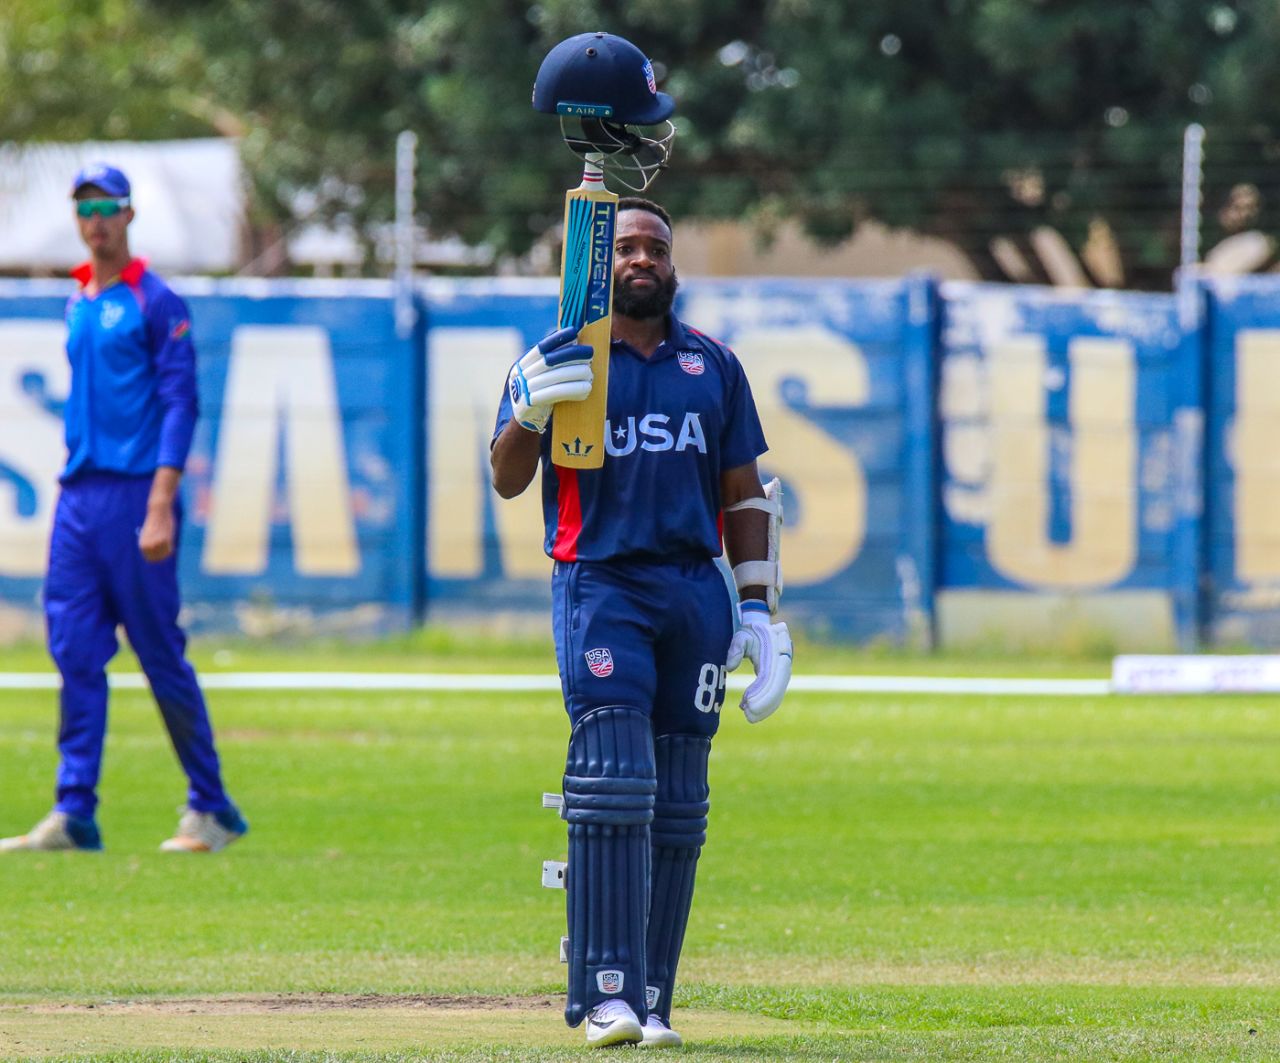 Aaron Jones pays homage to Chris Gayle after bringing up his maiden List A century for USA, Namibia v USA, WCL Division Two, Windhoek, April 21, 2019